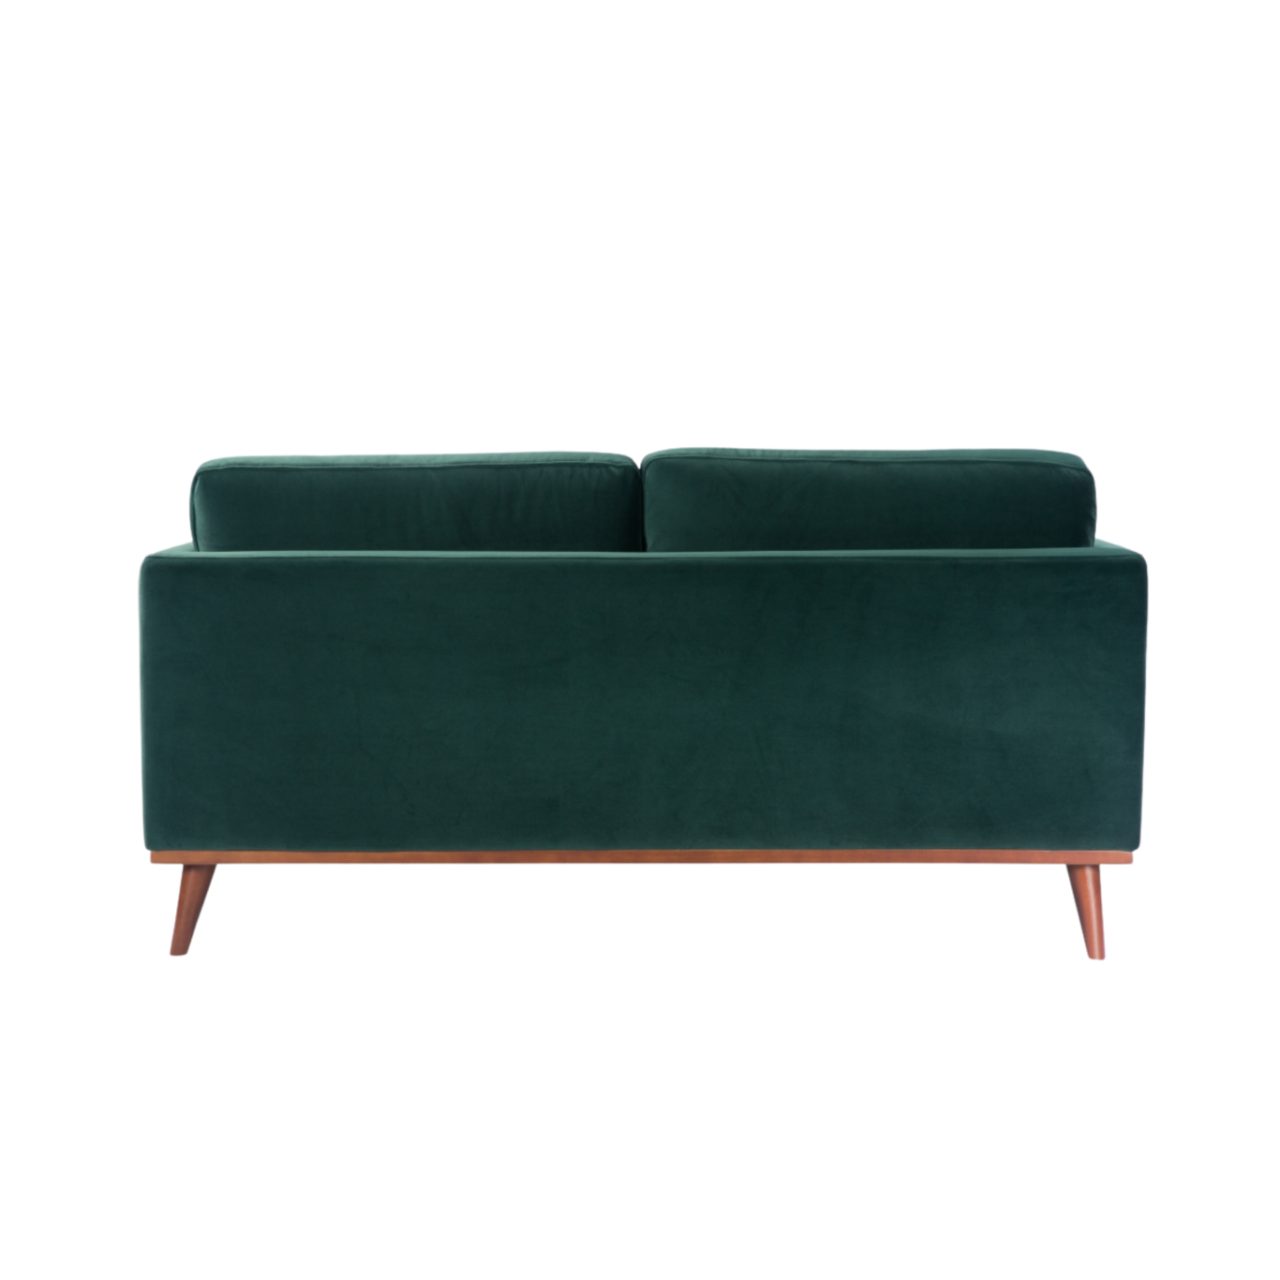 back view of detail of Simple, modern shaped 2 seater sofa in emerald green velvet upholstery